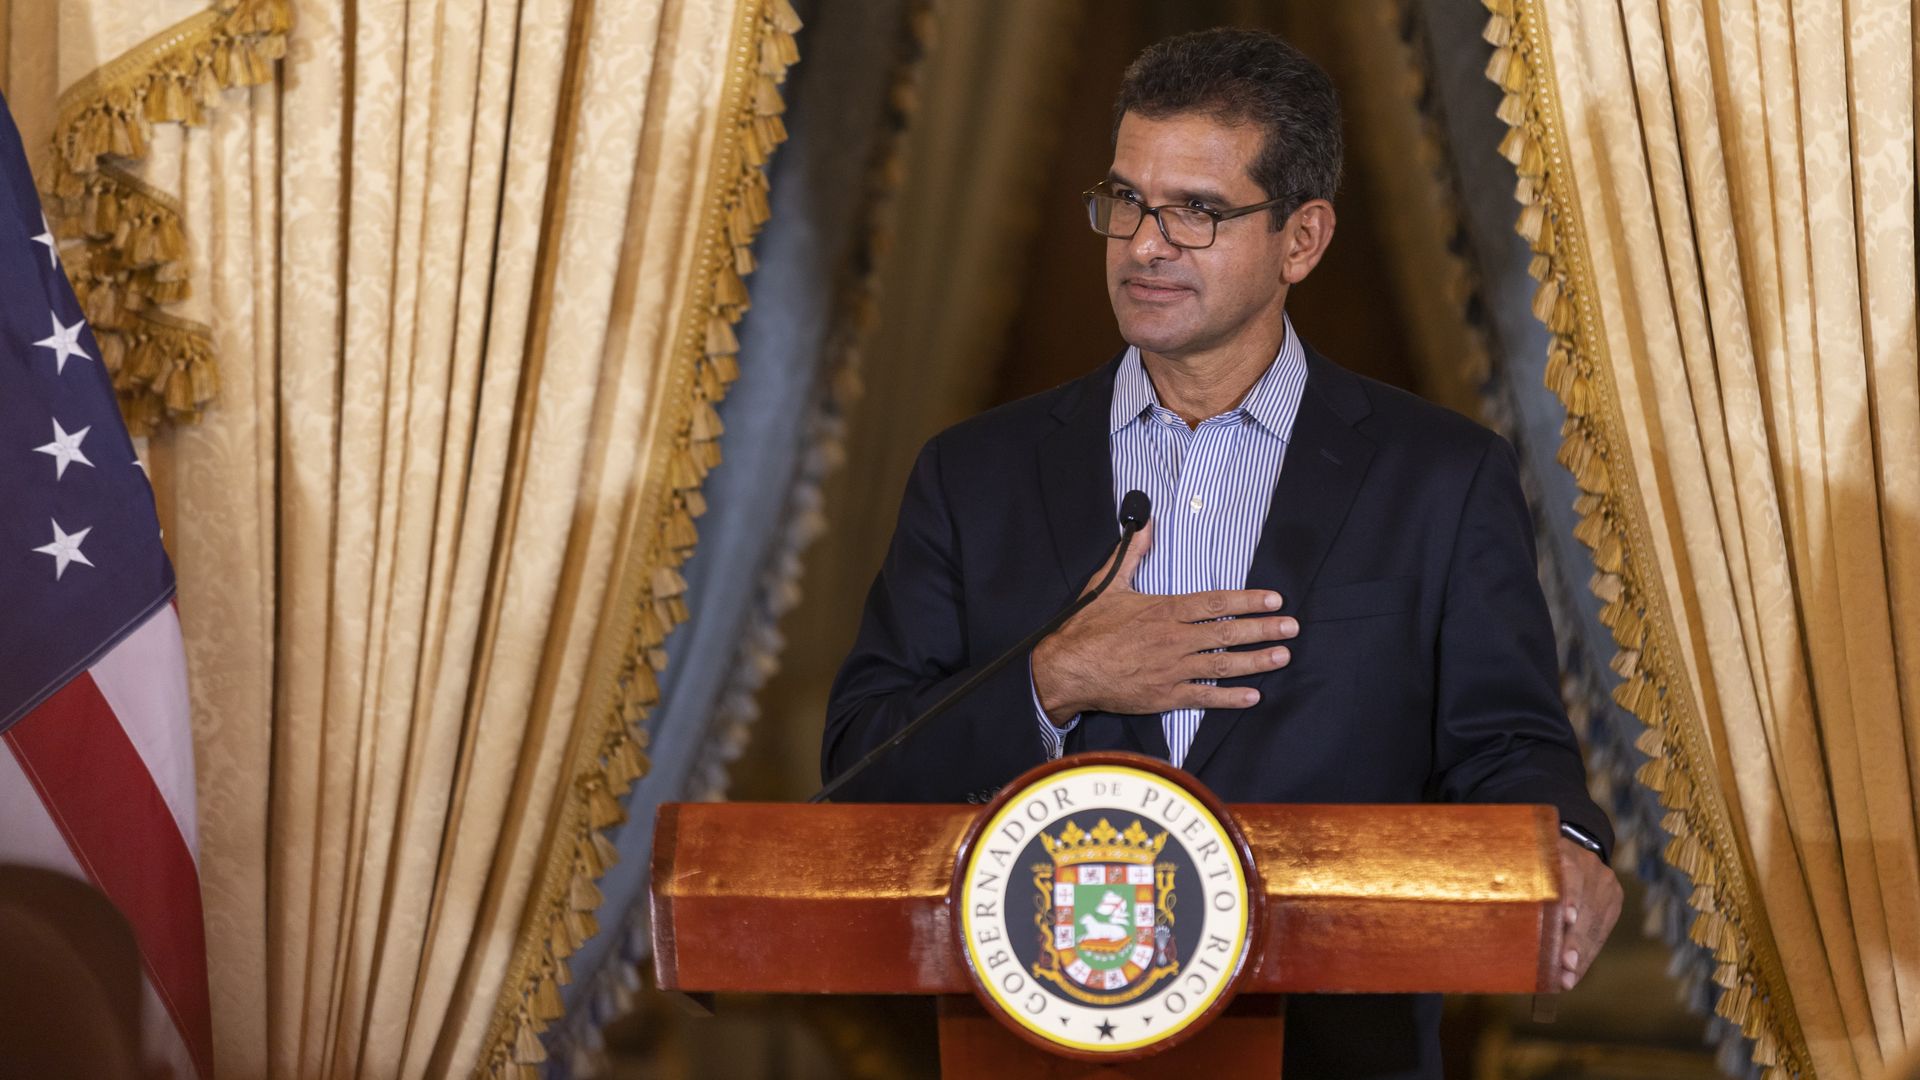 Puerto Rico's new governor Pedro Pierluisi holds press conference in San Juan, Puerto Rico on August 06